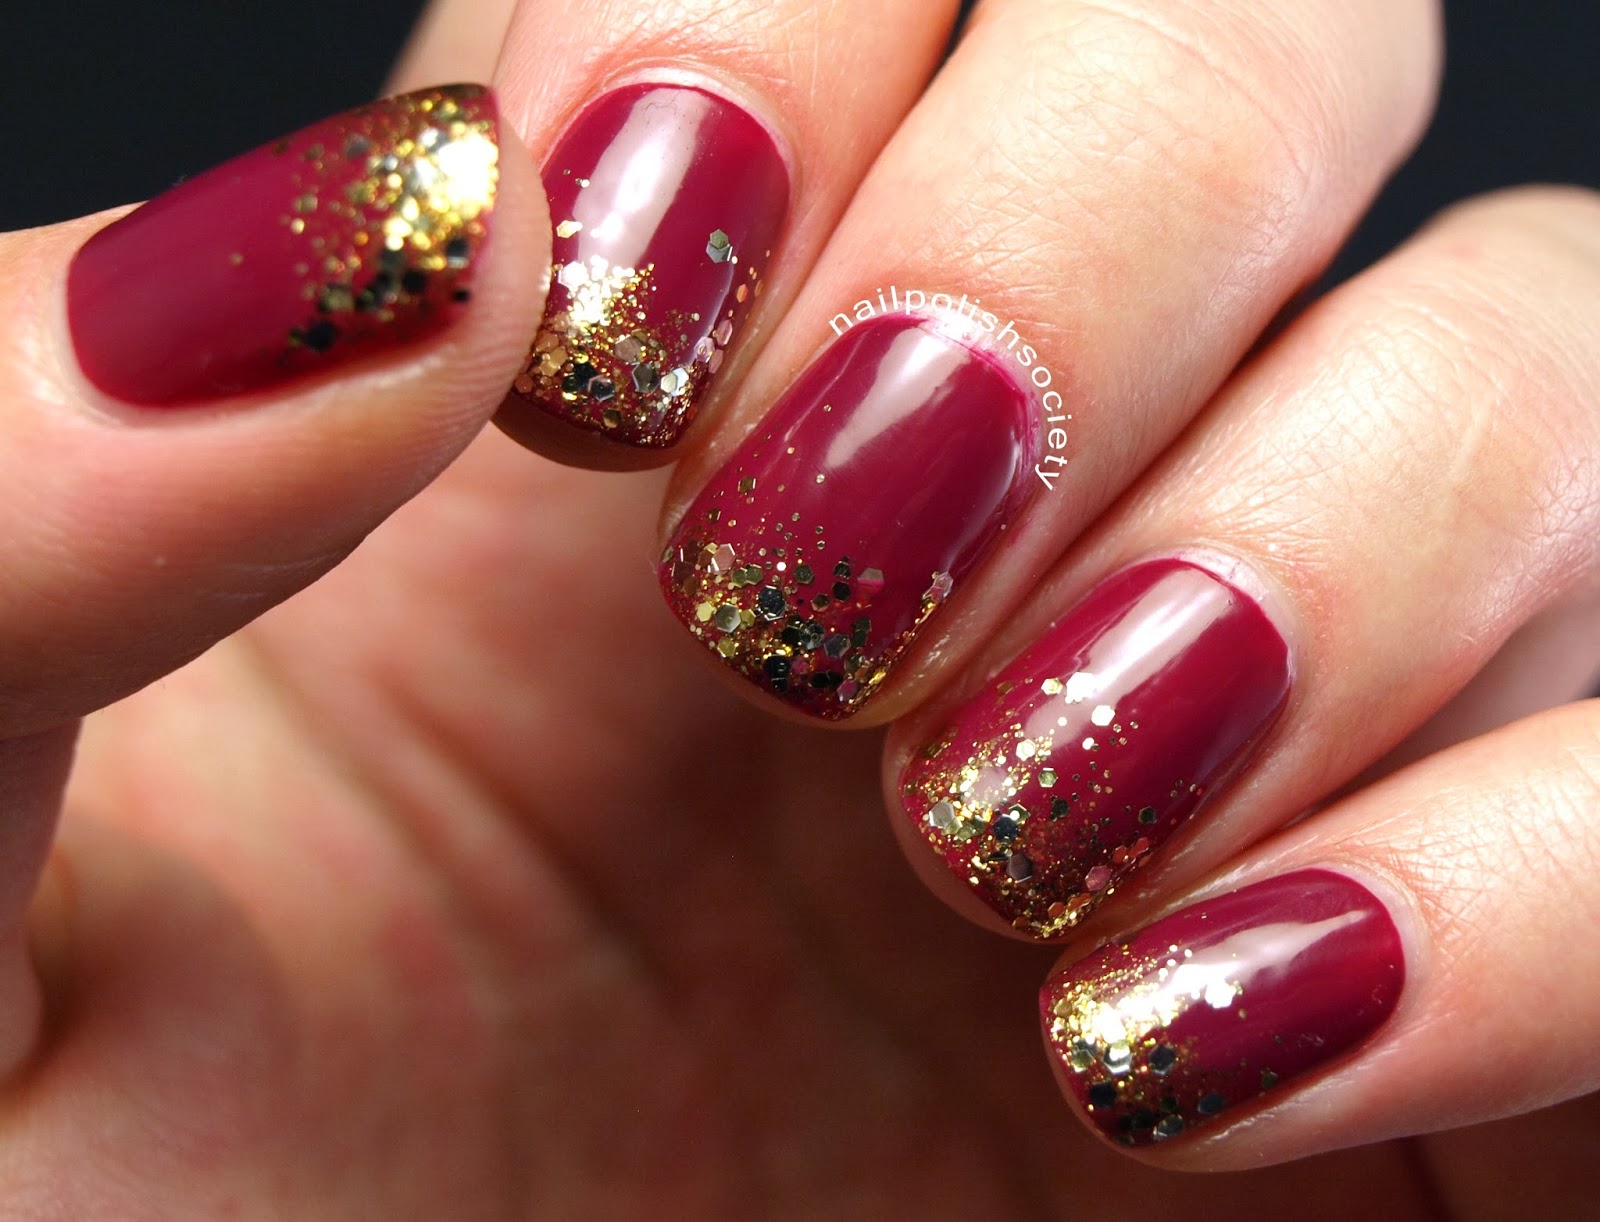 1. "Best Christmas Nail Colors for a Festive Look" - wide 4